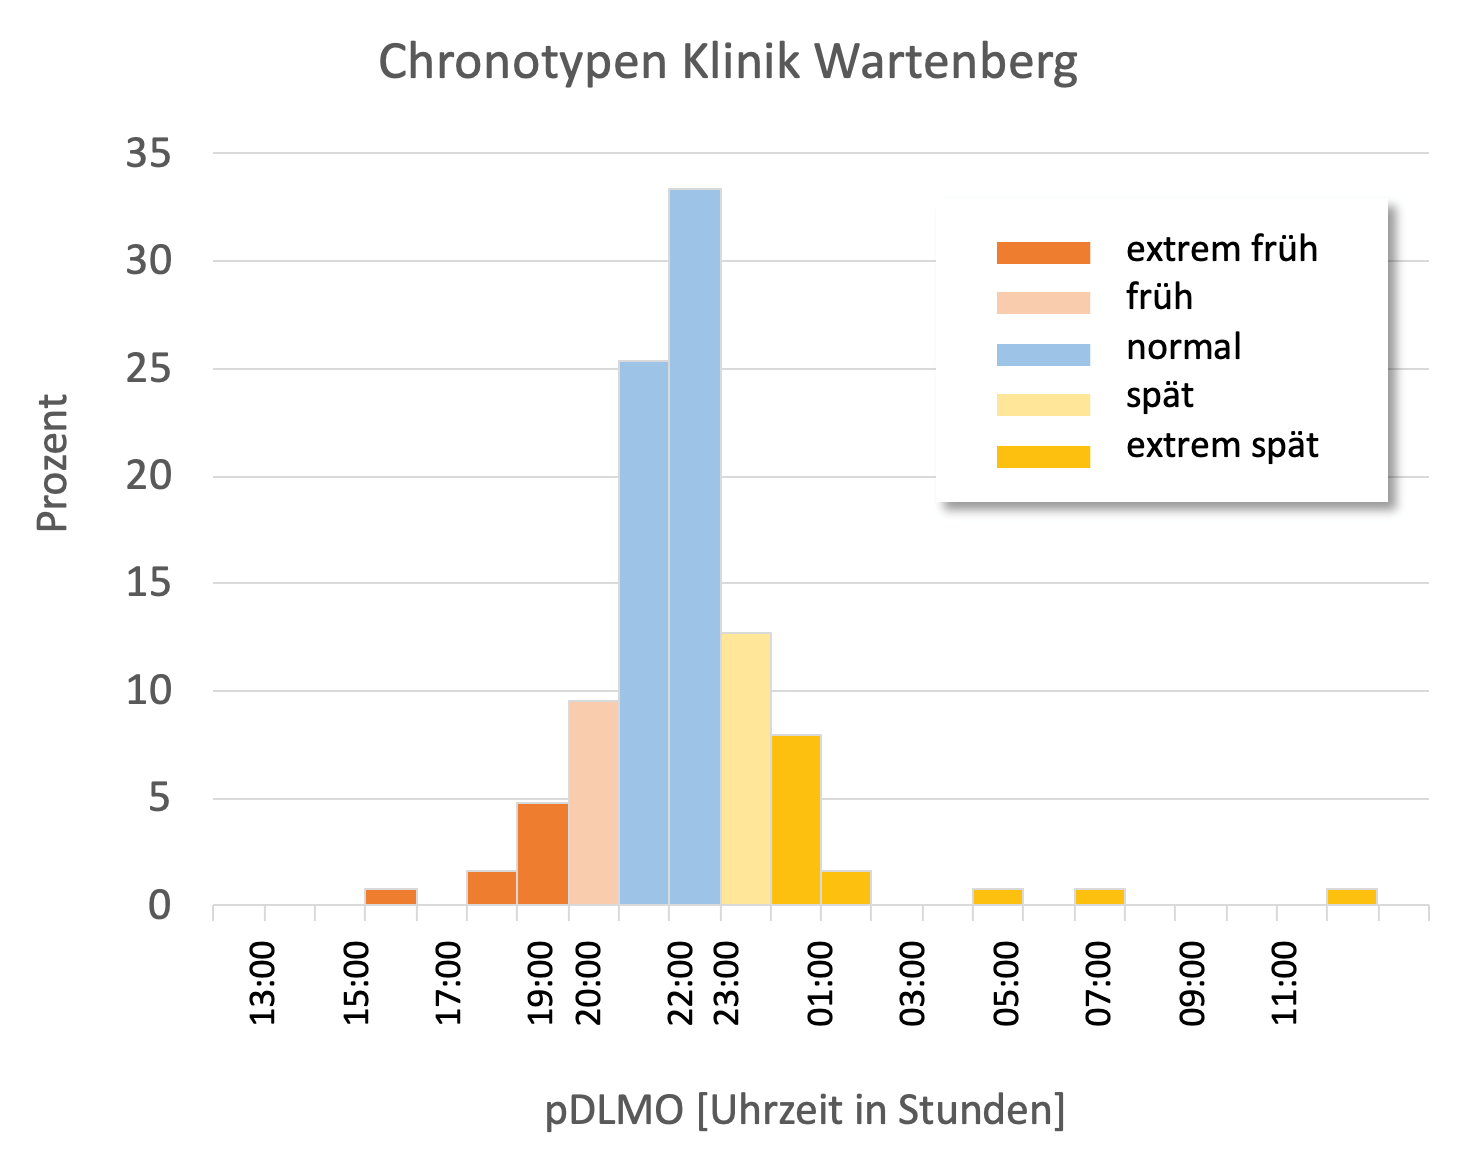 Distribution of chronotypes in the Wartenberg clinic